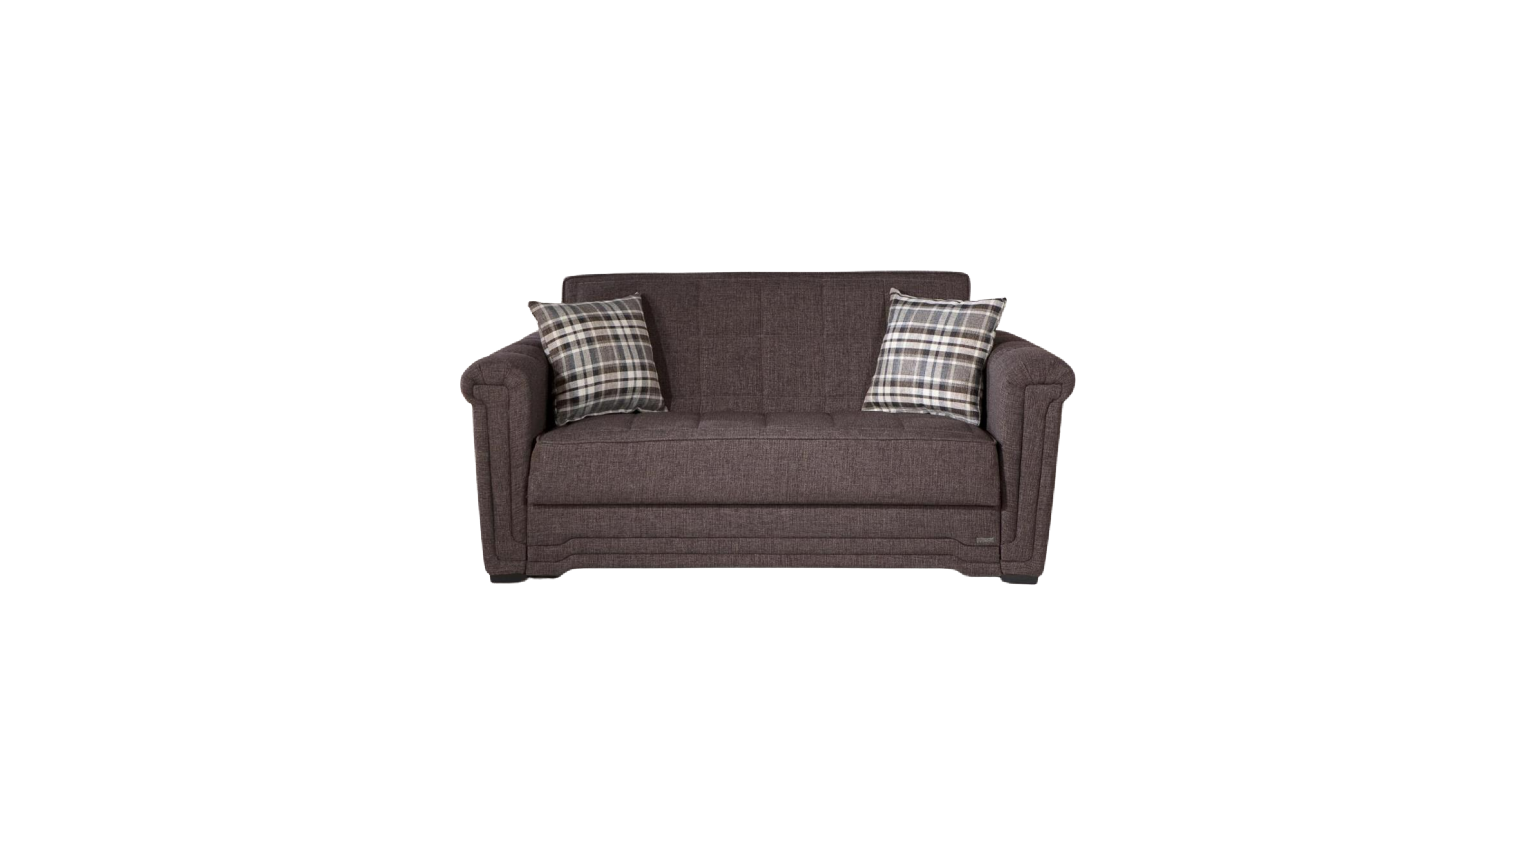 Victoria Pull Out Loveseat - Home Store Furniture